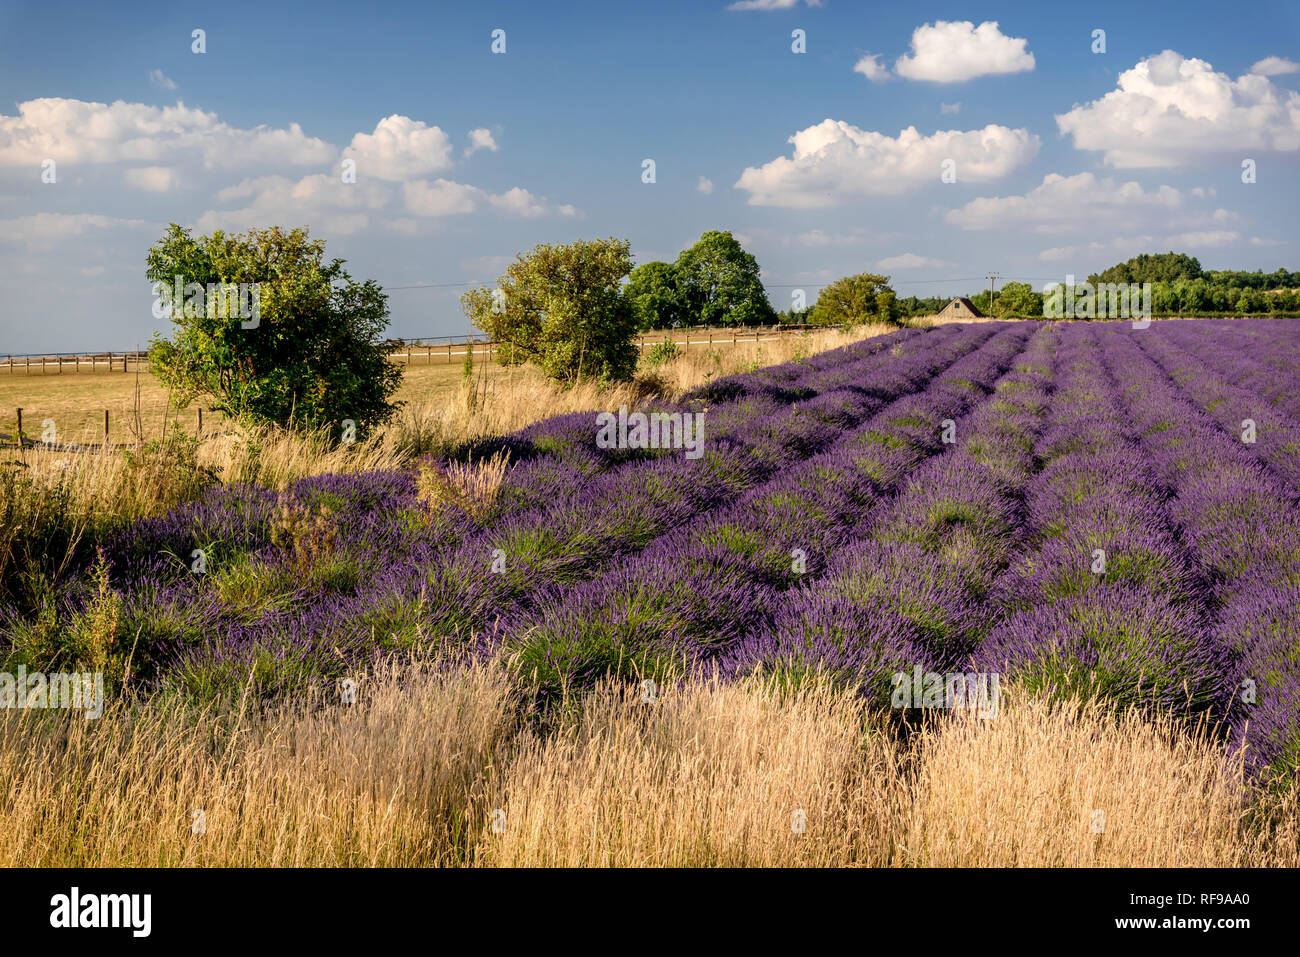 Field of lavender ready to harvest Stock Photo